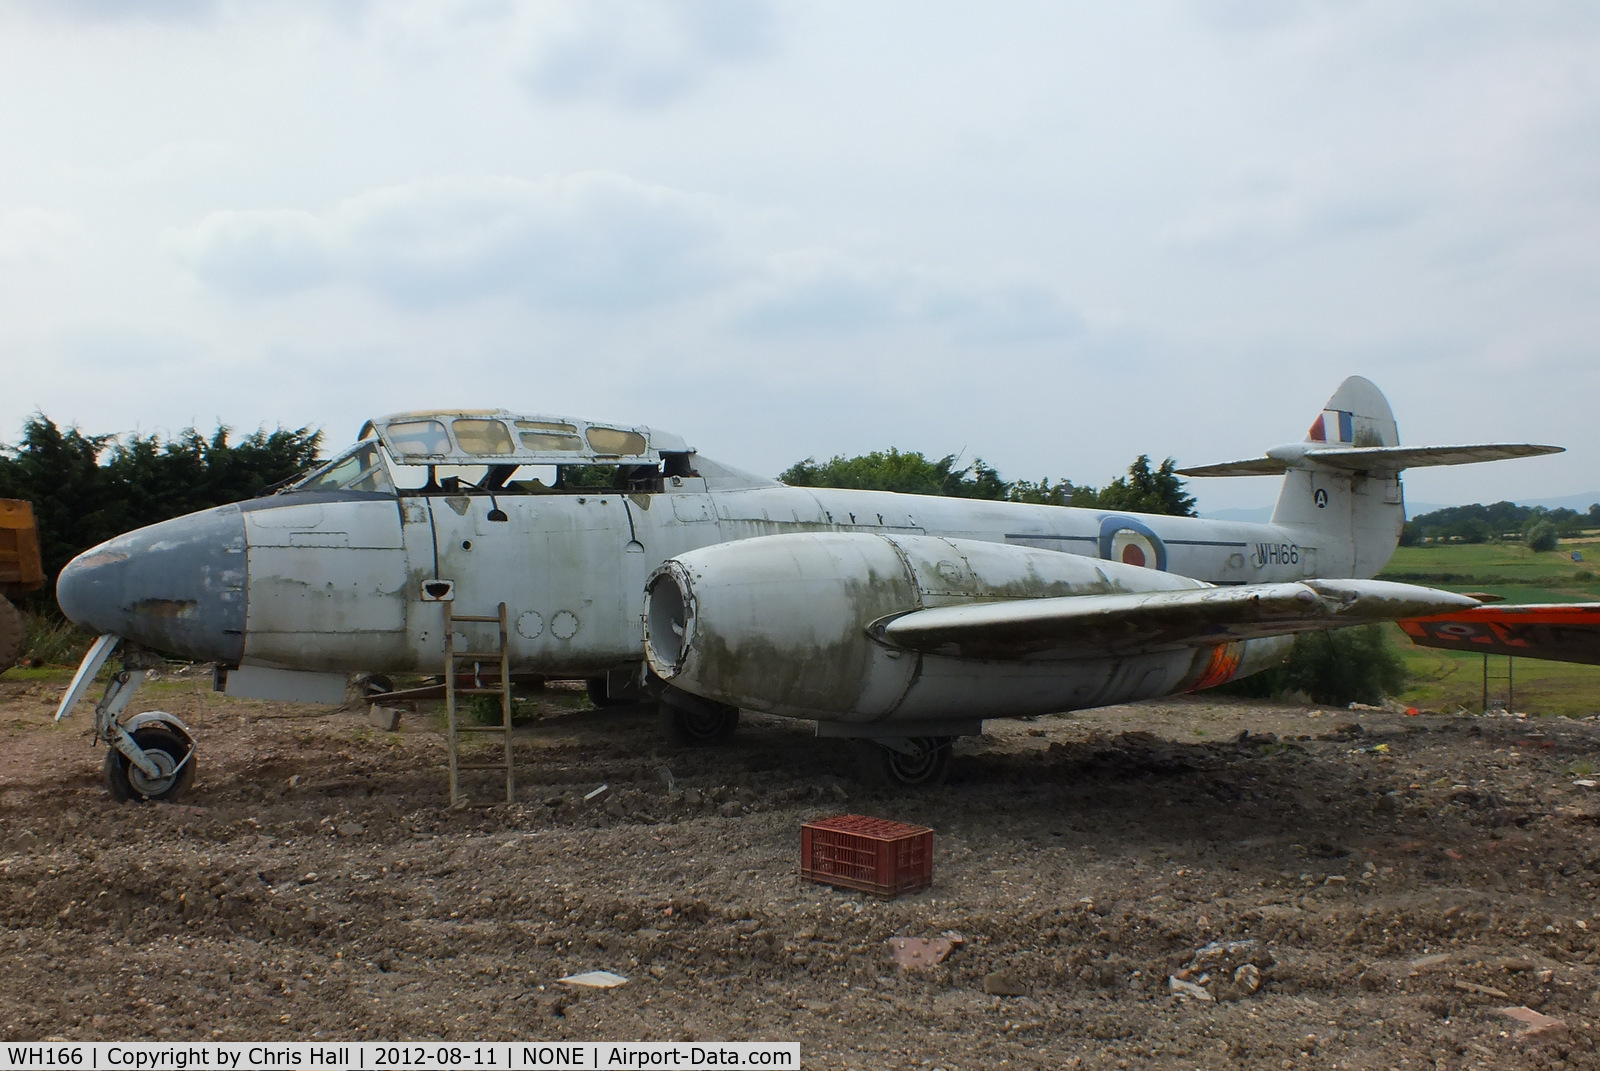 WH166, 1952 Gloster Meteor T.7 C/N not found WH166, part of a private collection on a farm in Pershore, Worcestershire